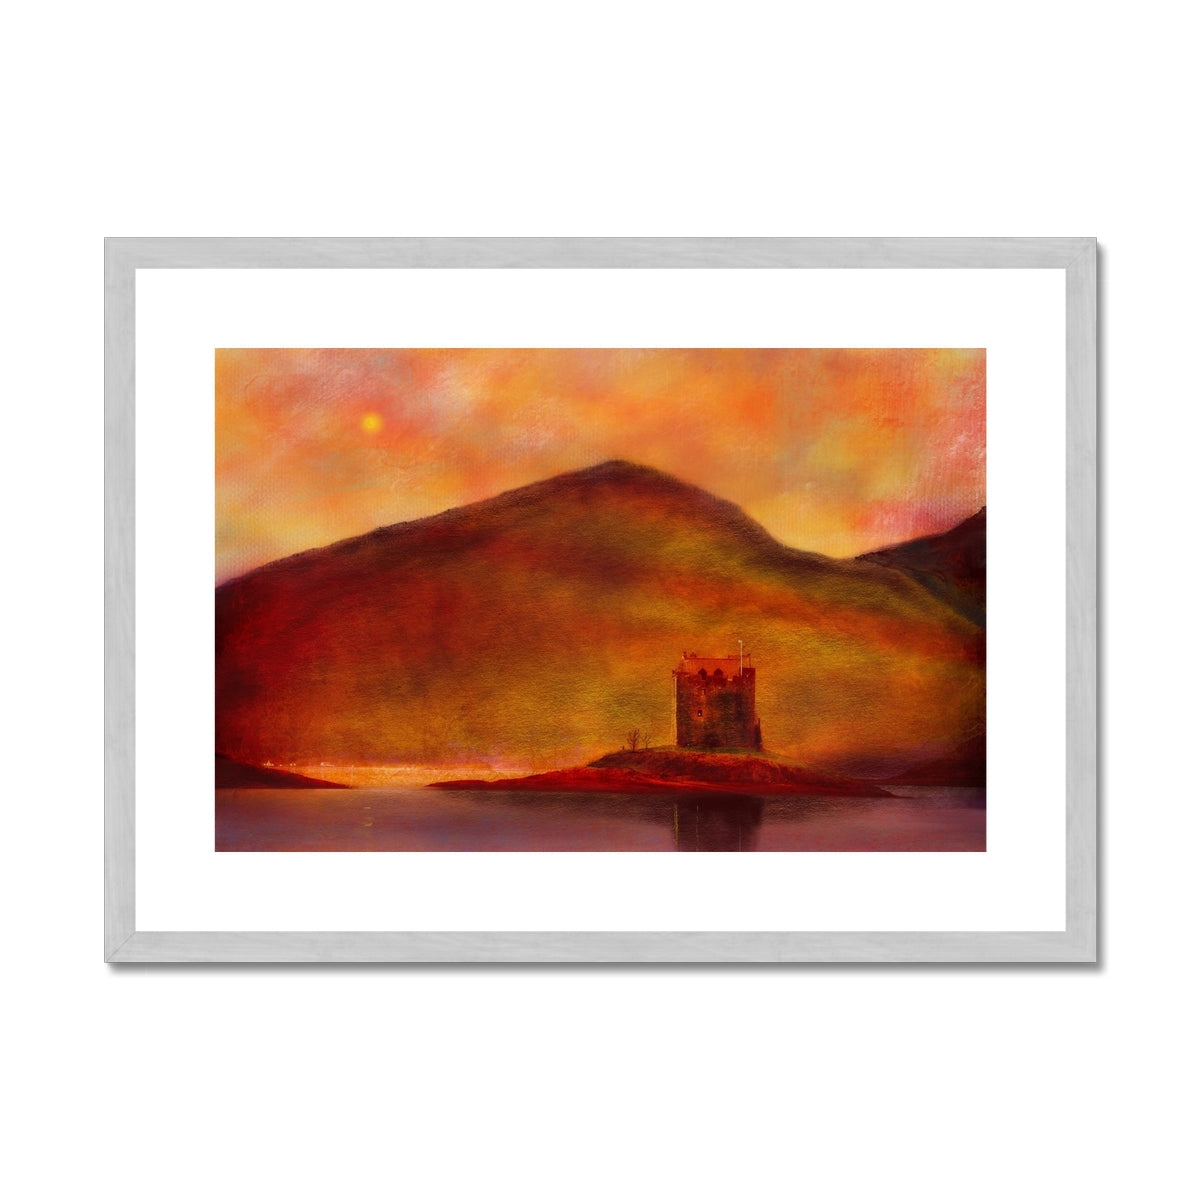 Castle Stalker Sunset Painting | Antique Framed & Mounted Prints From Scotland-Antique Framed & Mounted Prints-Historic & Iconic Scotland Art Gallery-A2 Landscape-Silver Frame-Paintings, Prints, Homeware, Art Gifts From Scotland By Scottish Artist Kevin Hunter